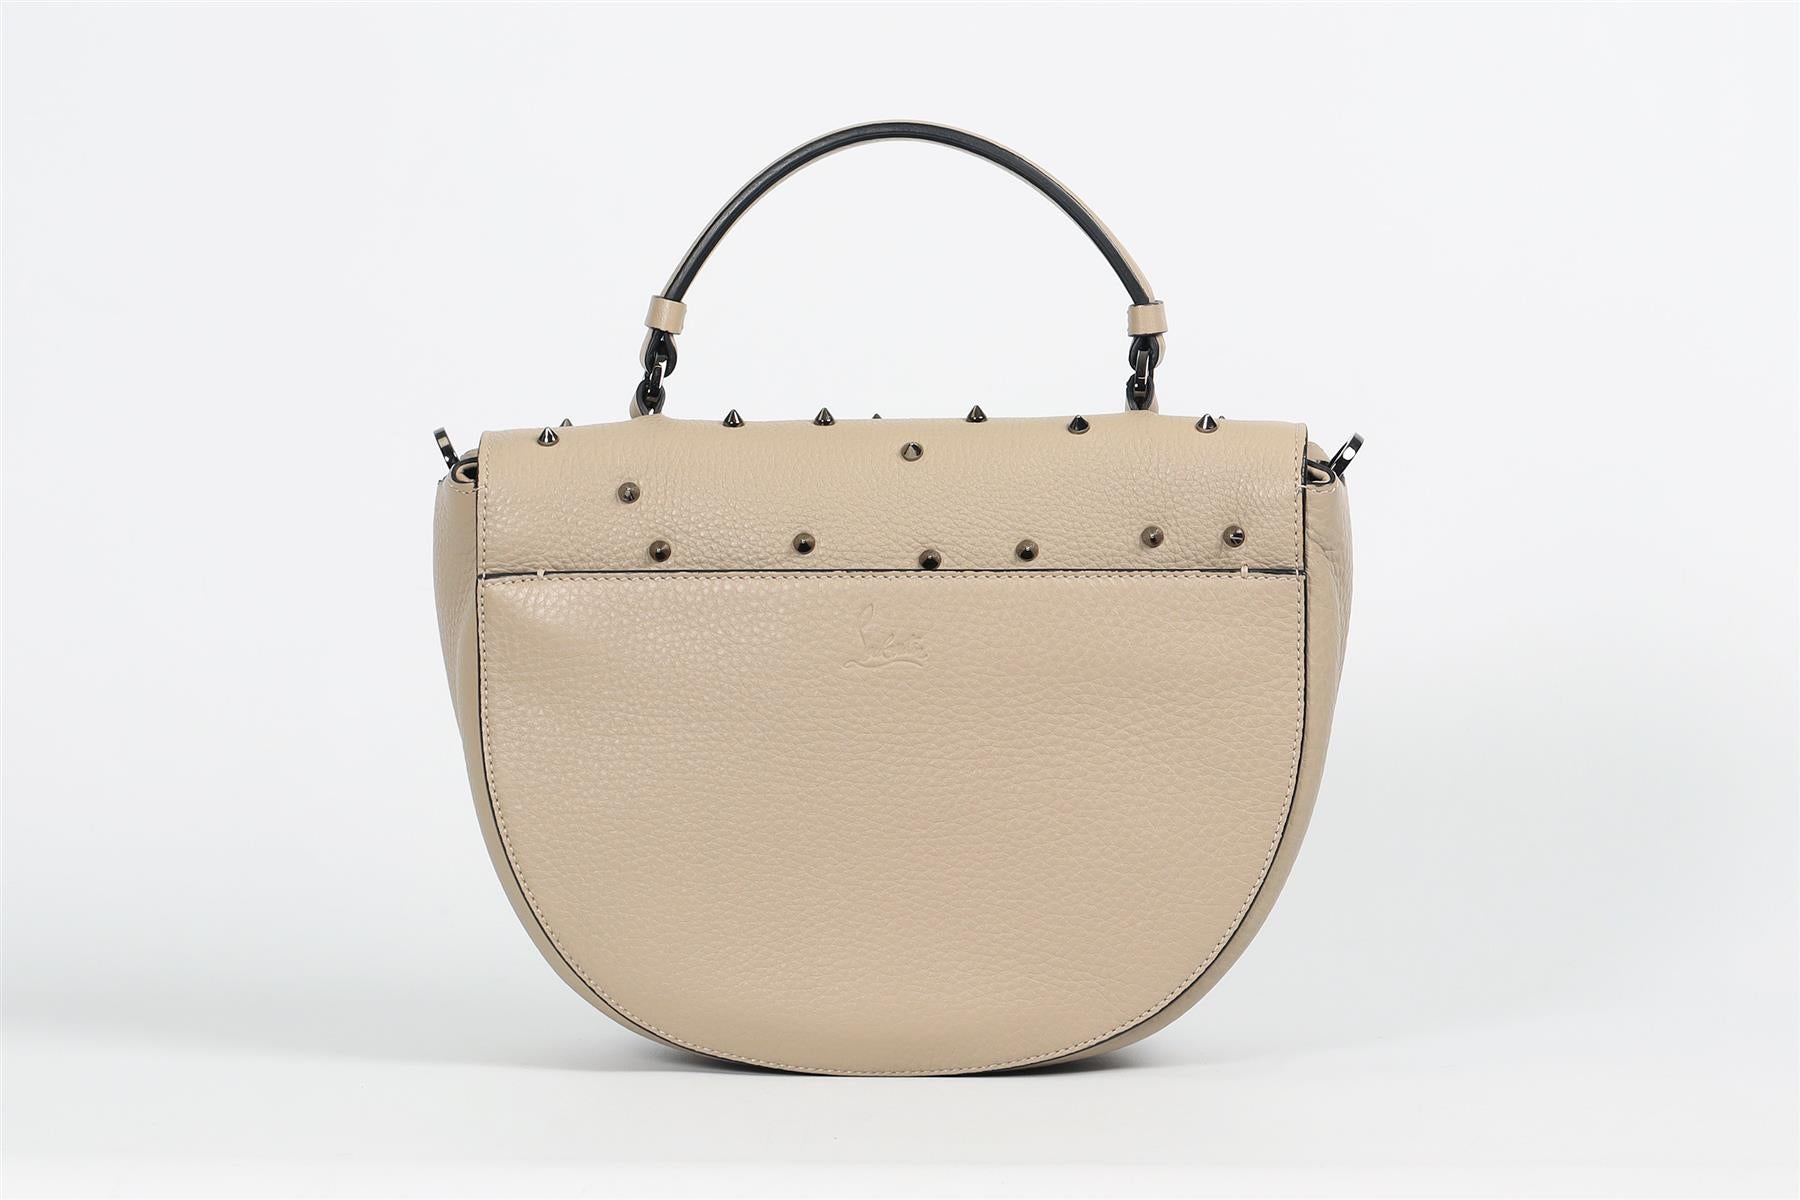 CHRISTIAN LOUBOUTIN PANETTONE SPIKED LEATHER SHOULDER BAG